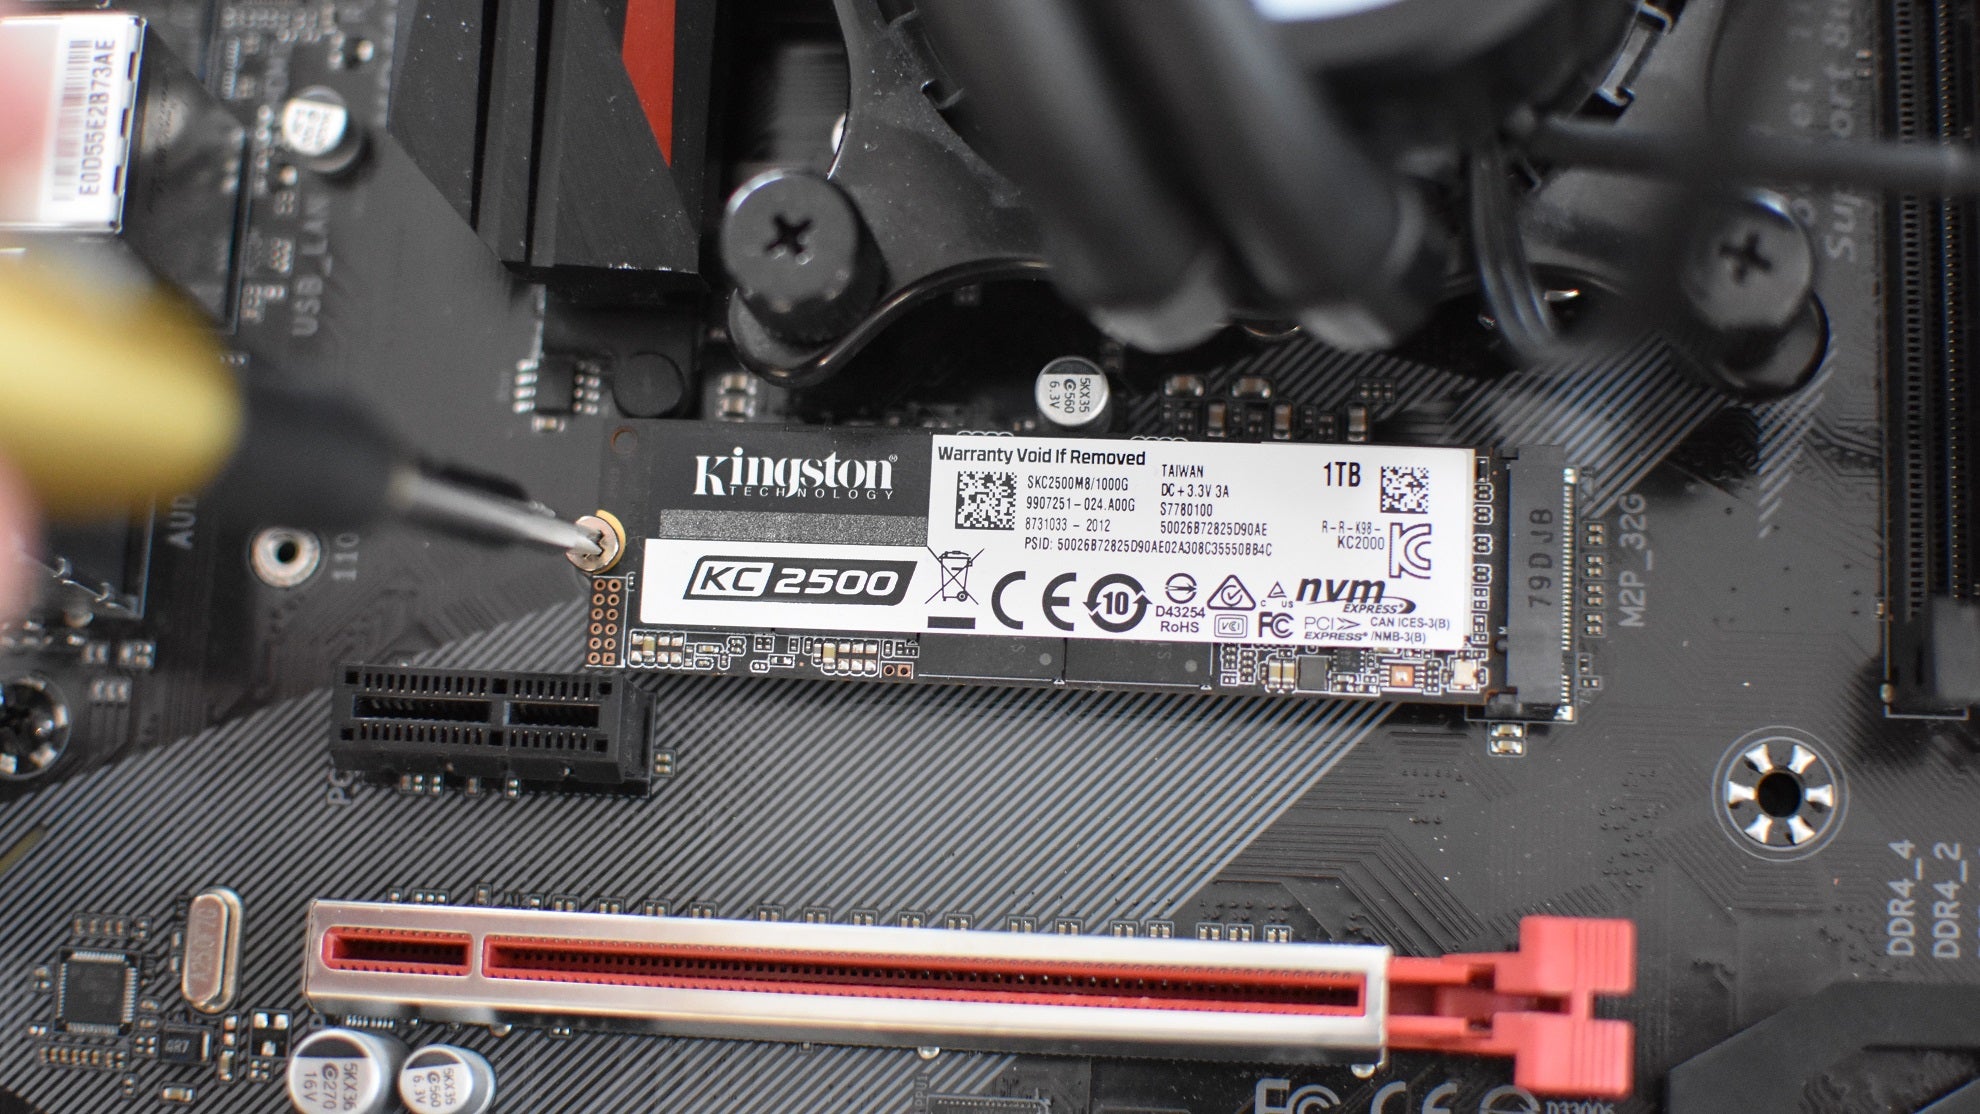 Monumental Post termometer How to install an SSD or HDD | Rock Paper Shotgun